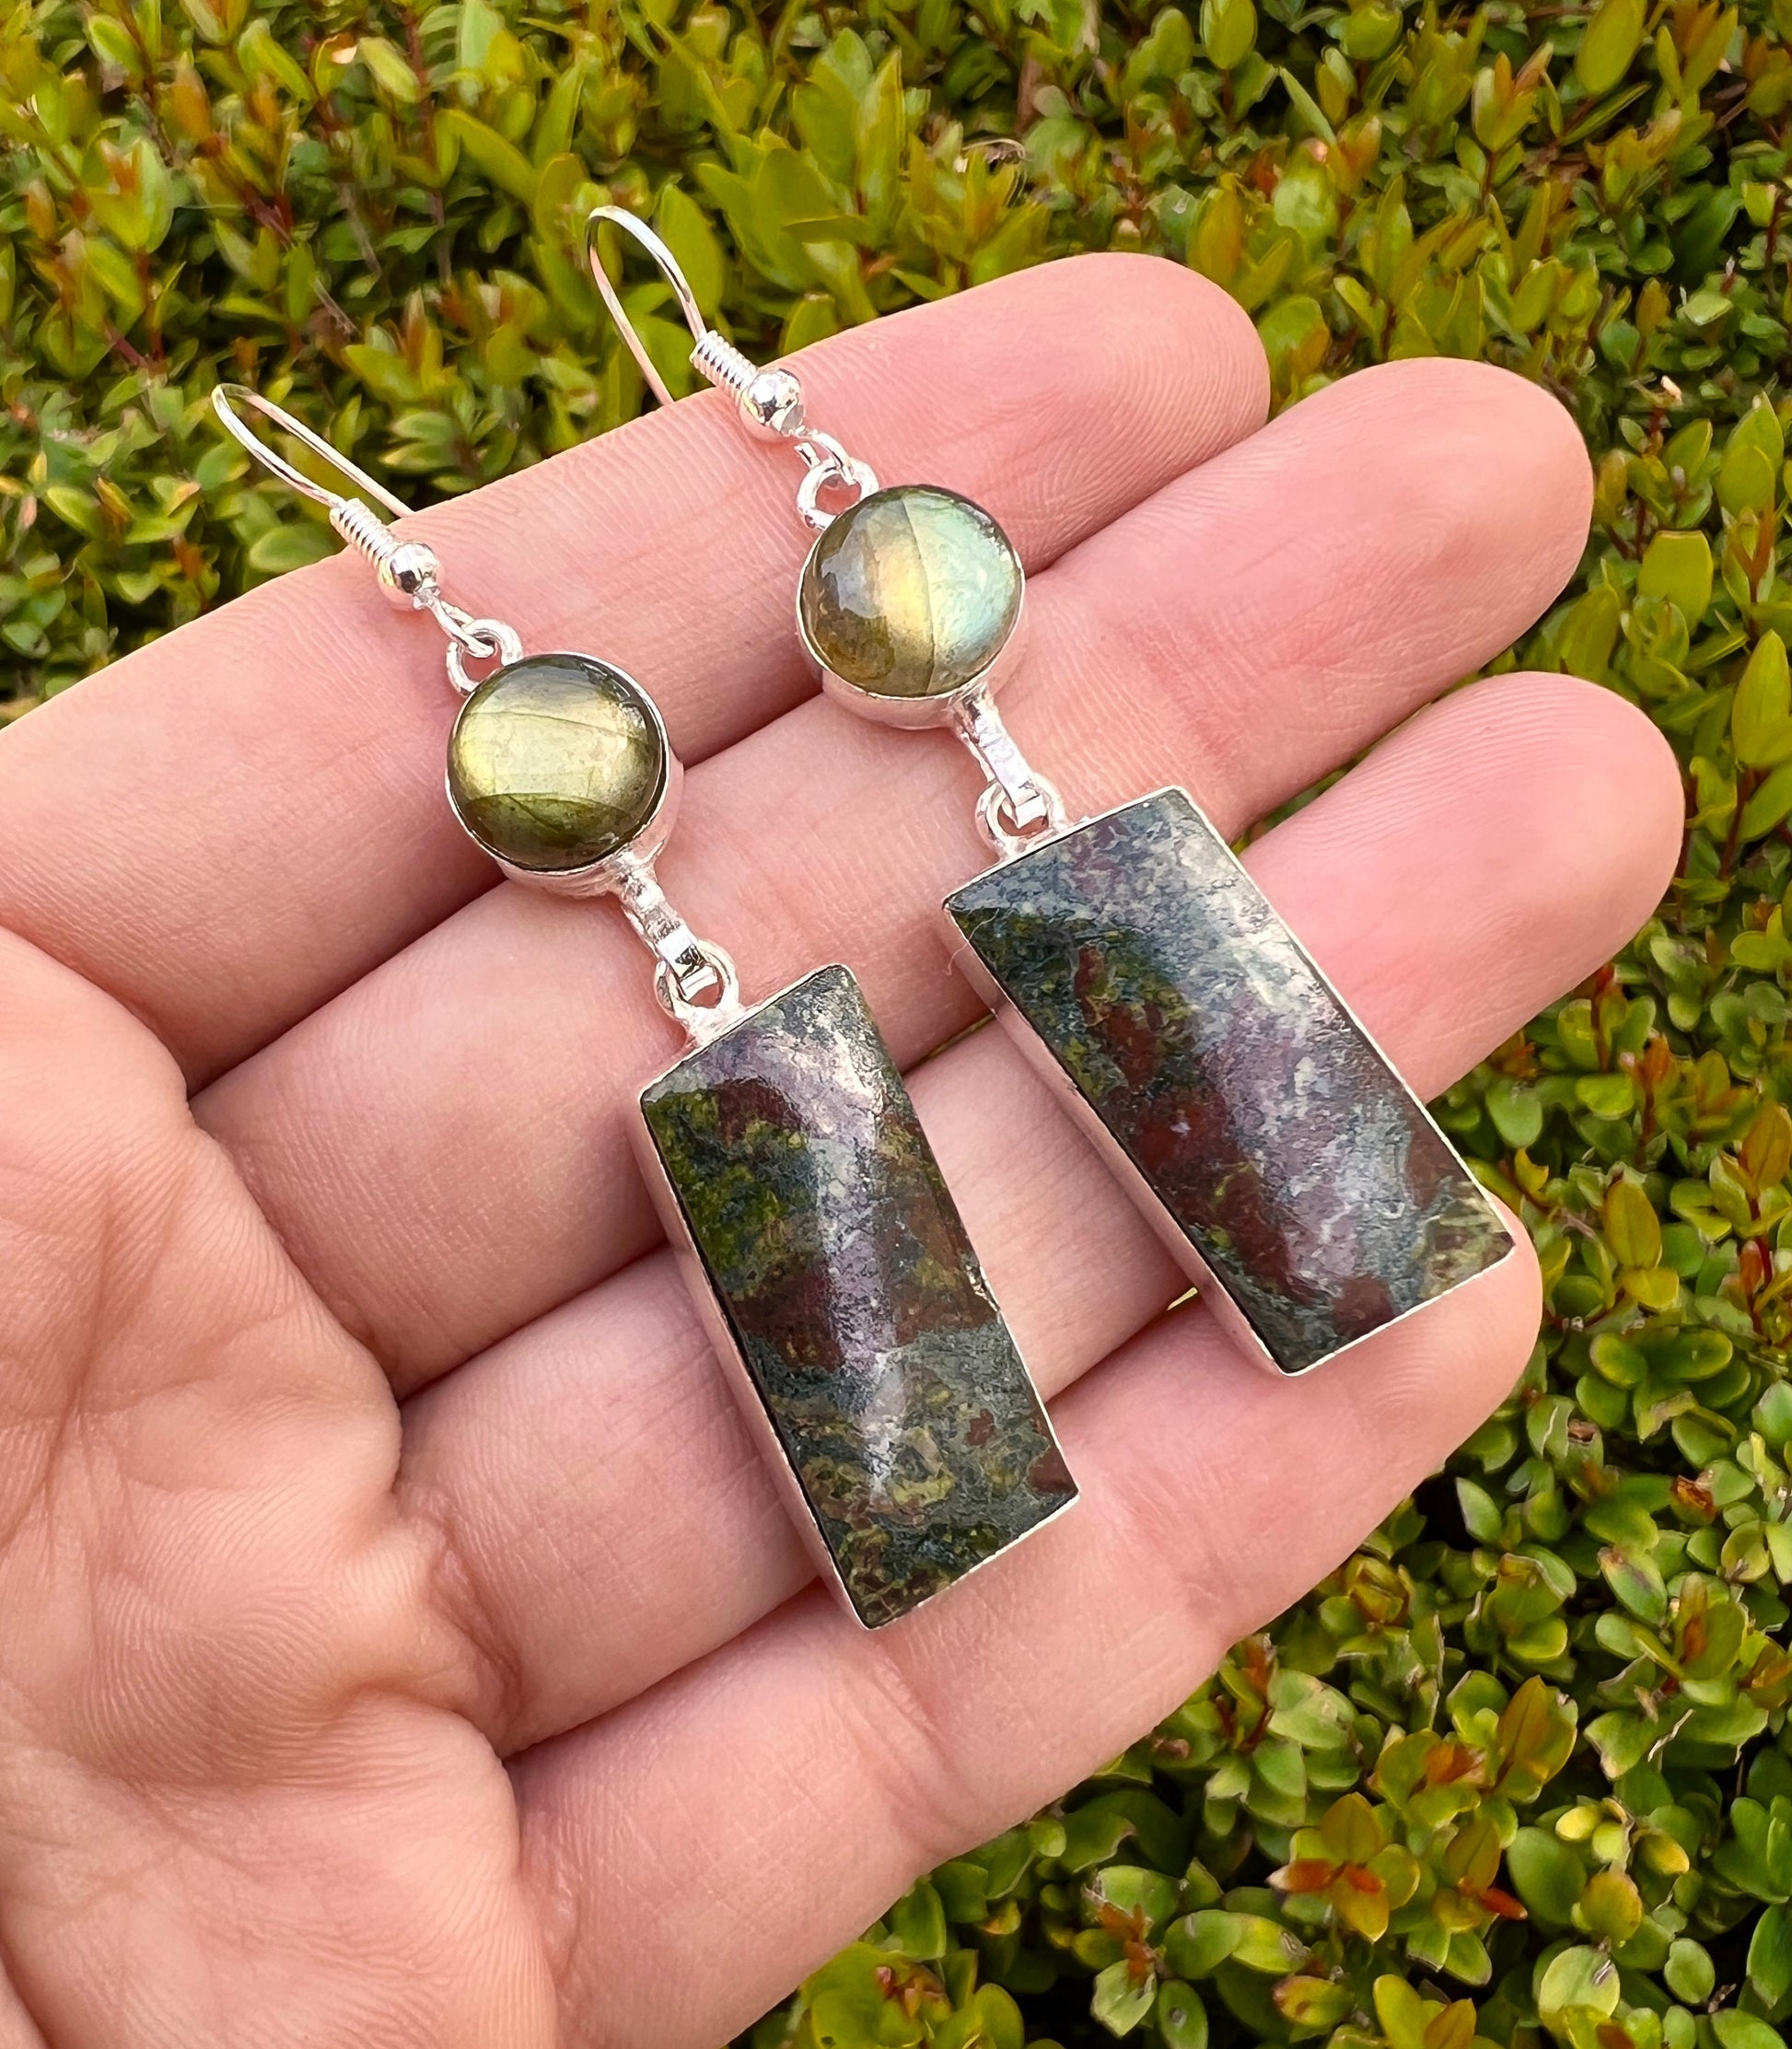 Dragon Blood Agate Labradorite Earrings Statement Necklace In Sterling Silver